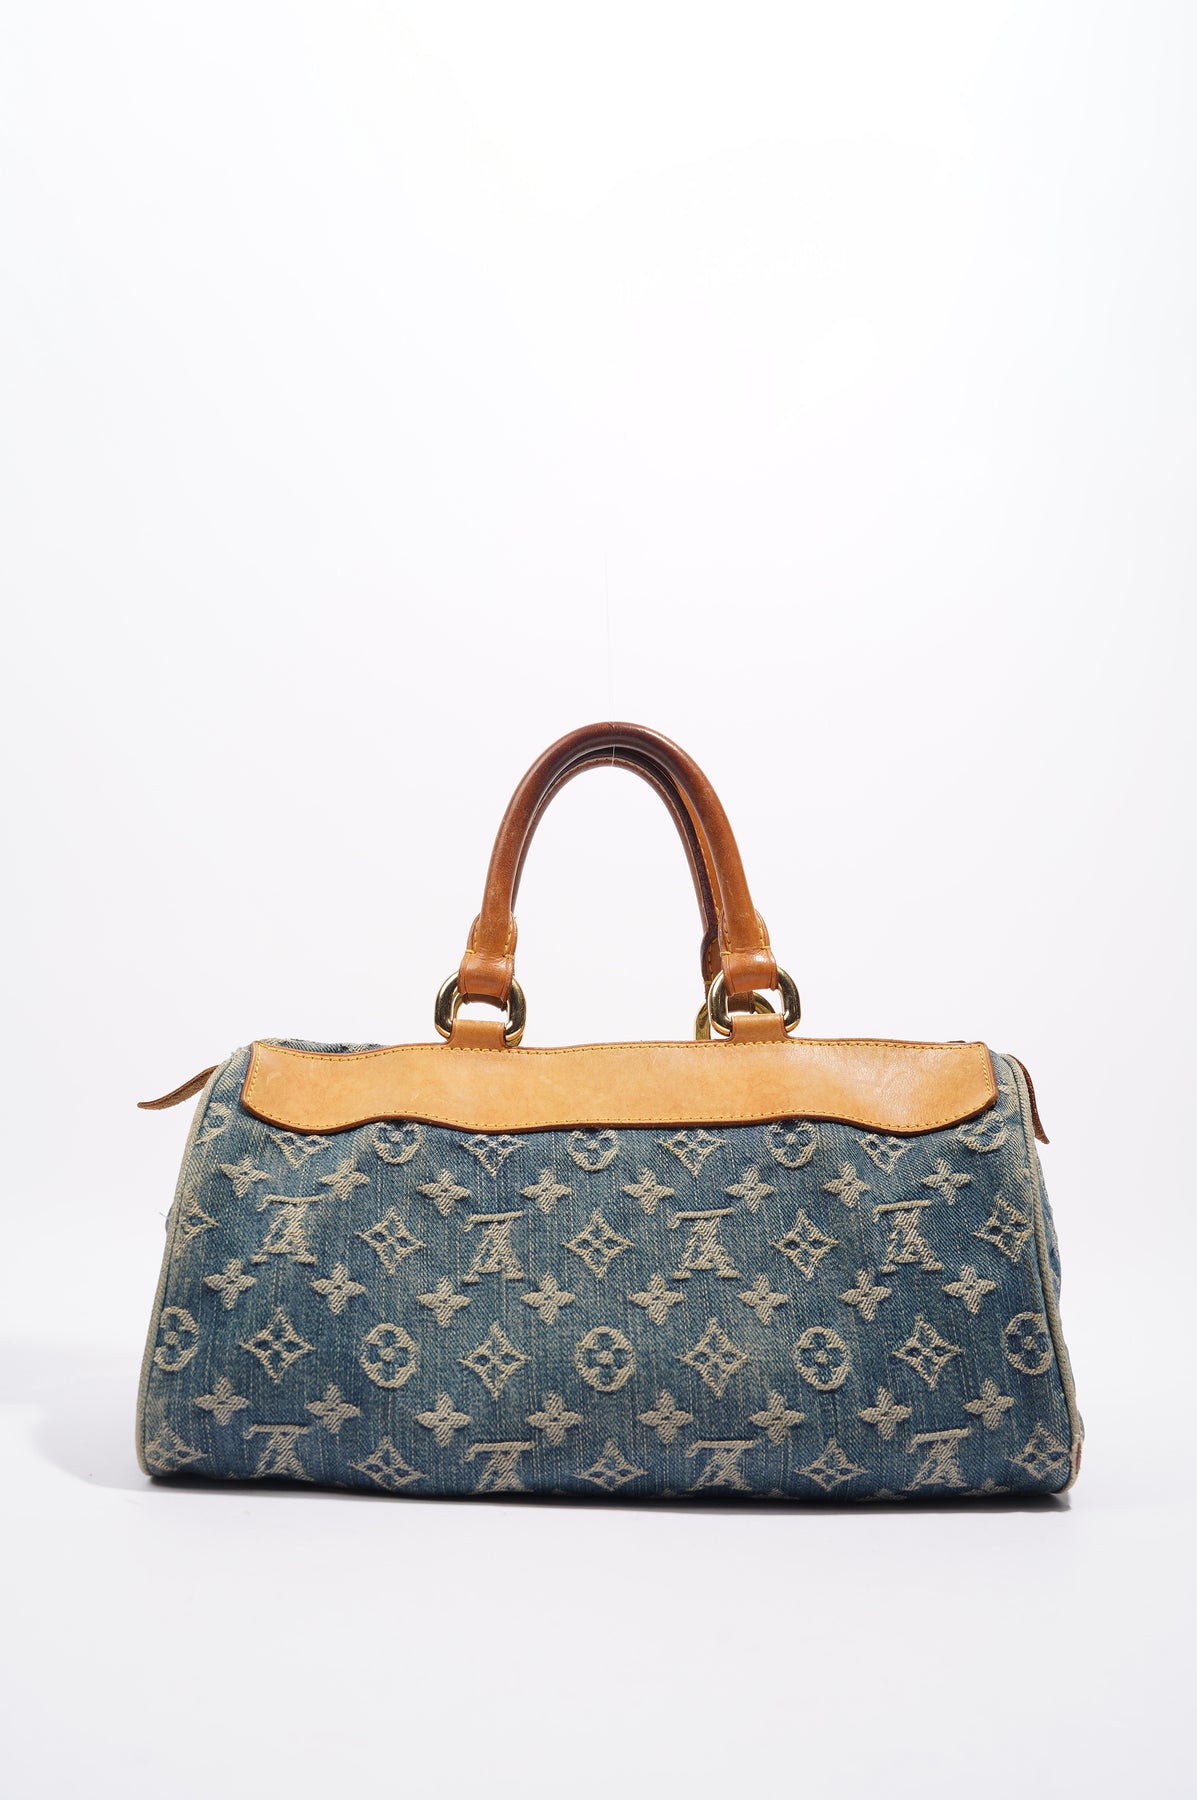 Louis Vuitton Denim Neo Speedy The 2006 LV denim series featured a number  of bags, including the Neo Speedy in a classic blue denim…